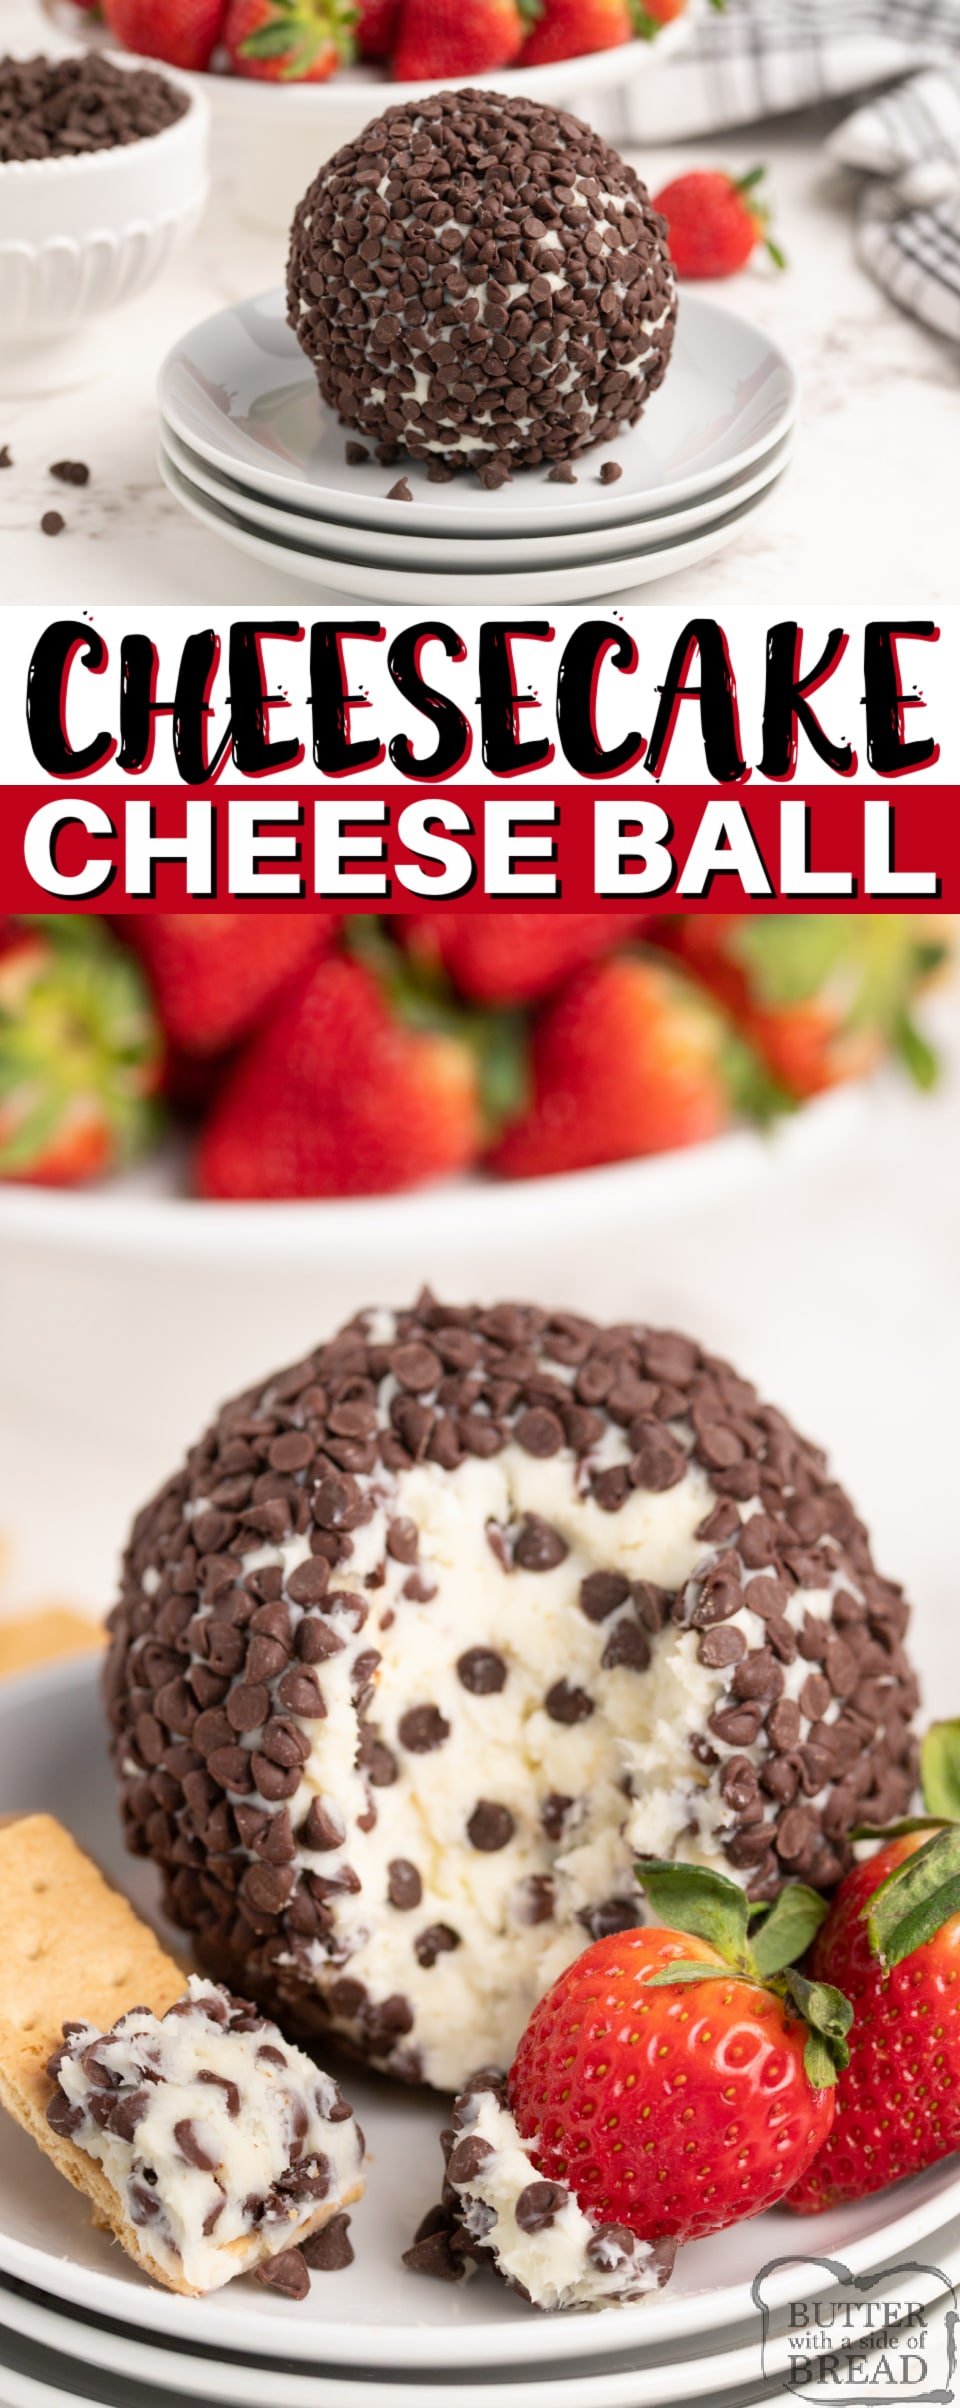 Cheesecake Cheese Ball recipe made with only 5 ingredients for an easy appetizer! This chocolate chip cheesecake cheese ball pairs perfectly with fresh strawberries and graham crackers and only takes a few minutes to make!